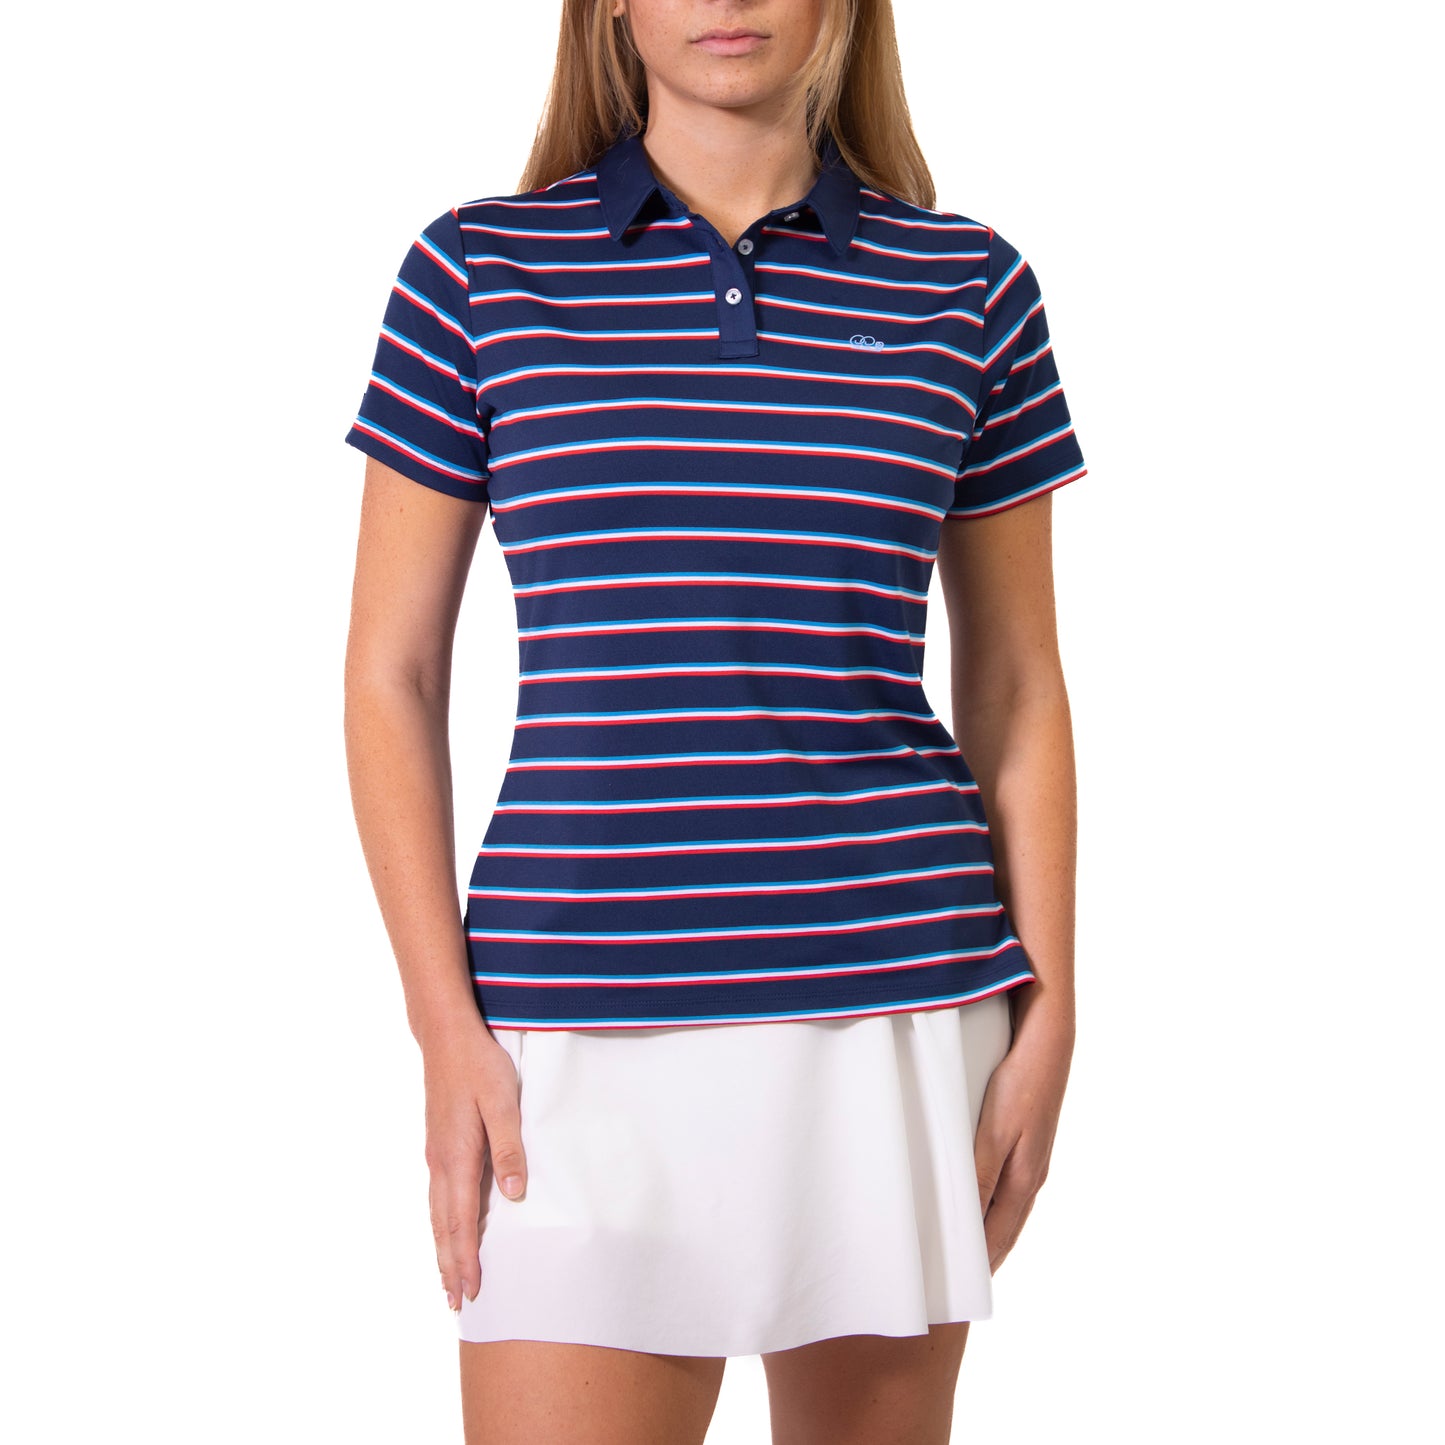 Women's Knockout Polo - Exclusive Golf Performance Polo